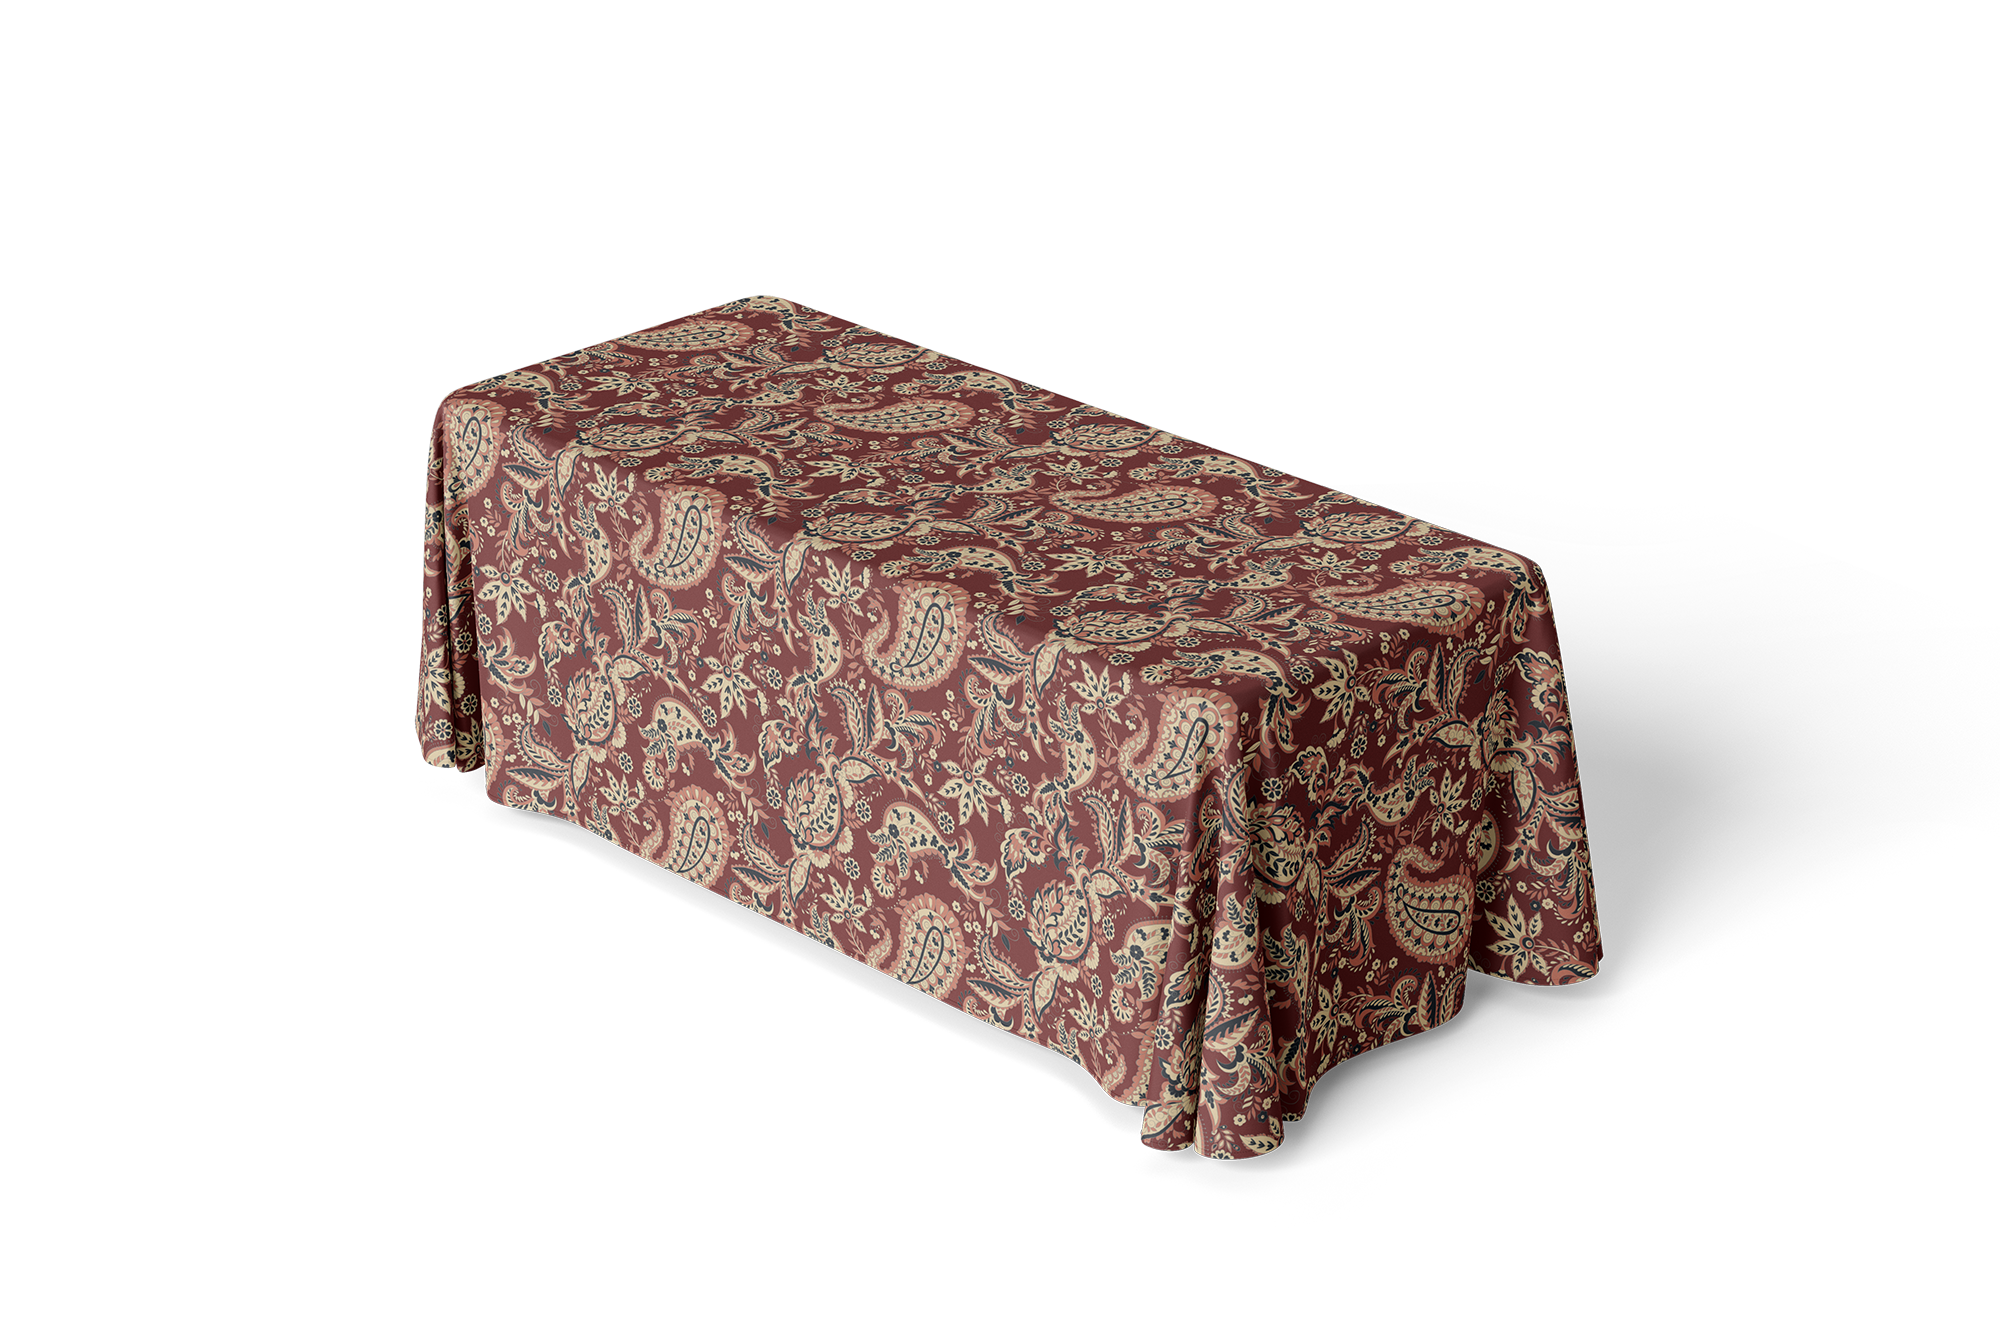 Redly Table-Cloth - ART MOOD